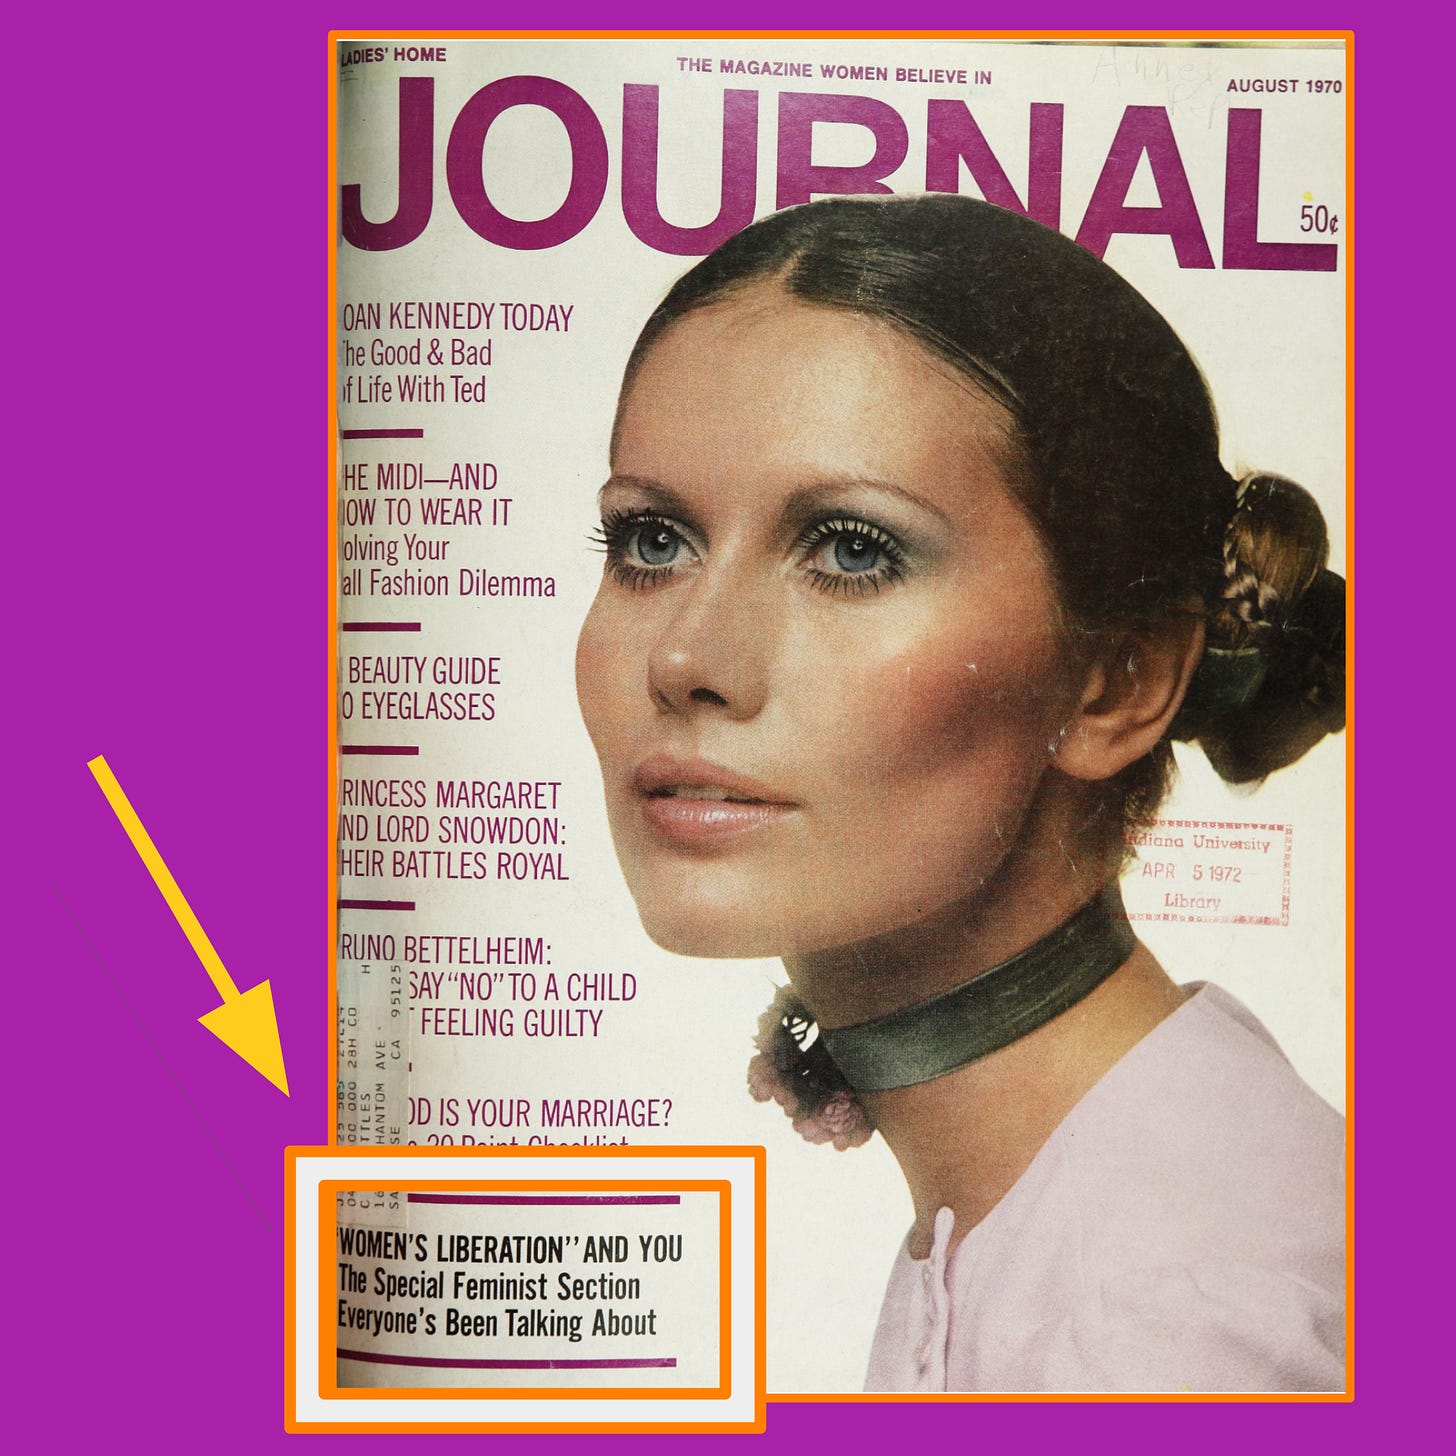 Image: The cover of Ladies’ Home Journal form August 1970. A white woman model looks off into the distance with her lips slightly parted. She has long dark eyelashes, blue eyeshadow, and peachy nude blush and lipstick. Her light brown hair is slicked back in a braided bun. She wears a green ribbon collar with a sprig of white flowers on it. The headline “‘Women’s Liberation’ and You: The Special Feminist Section Everyone’s Been Talking About” in emphasized wirth an orange frame and yellow arrow added by Cita